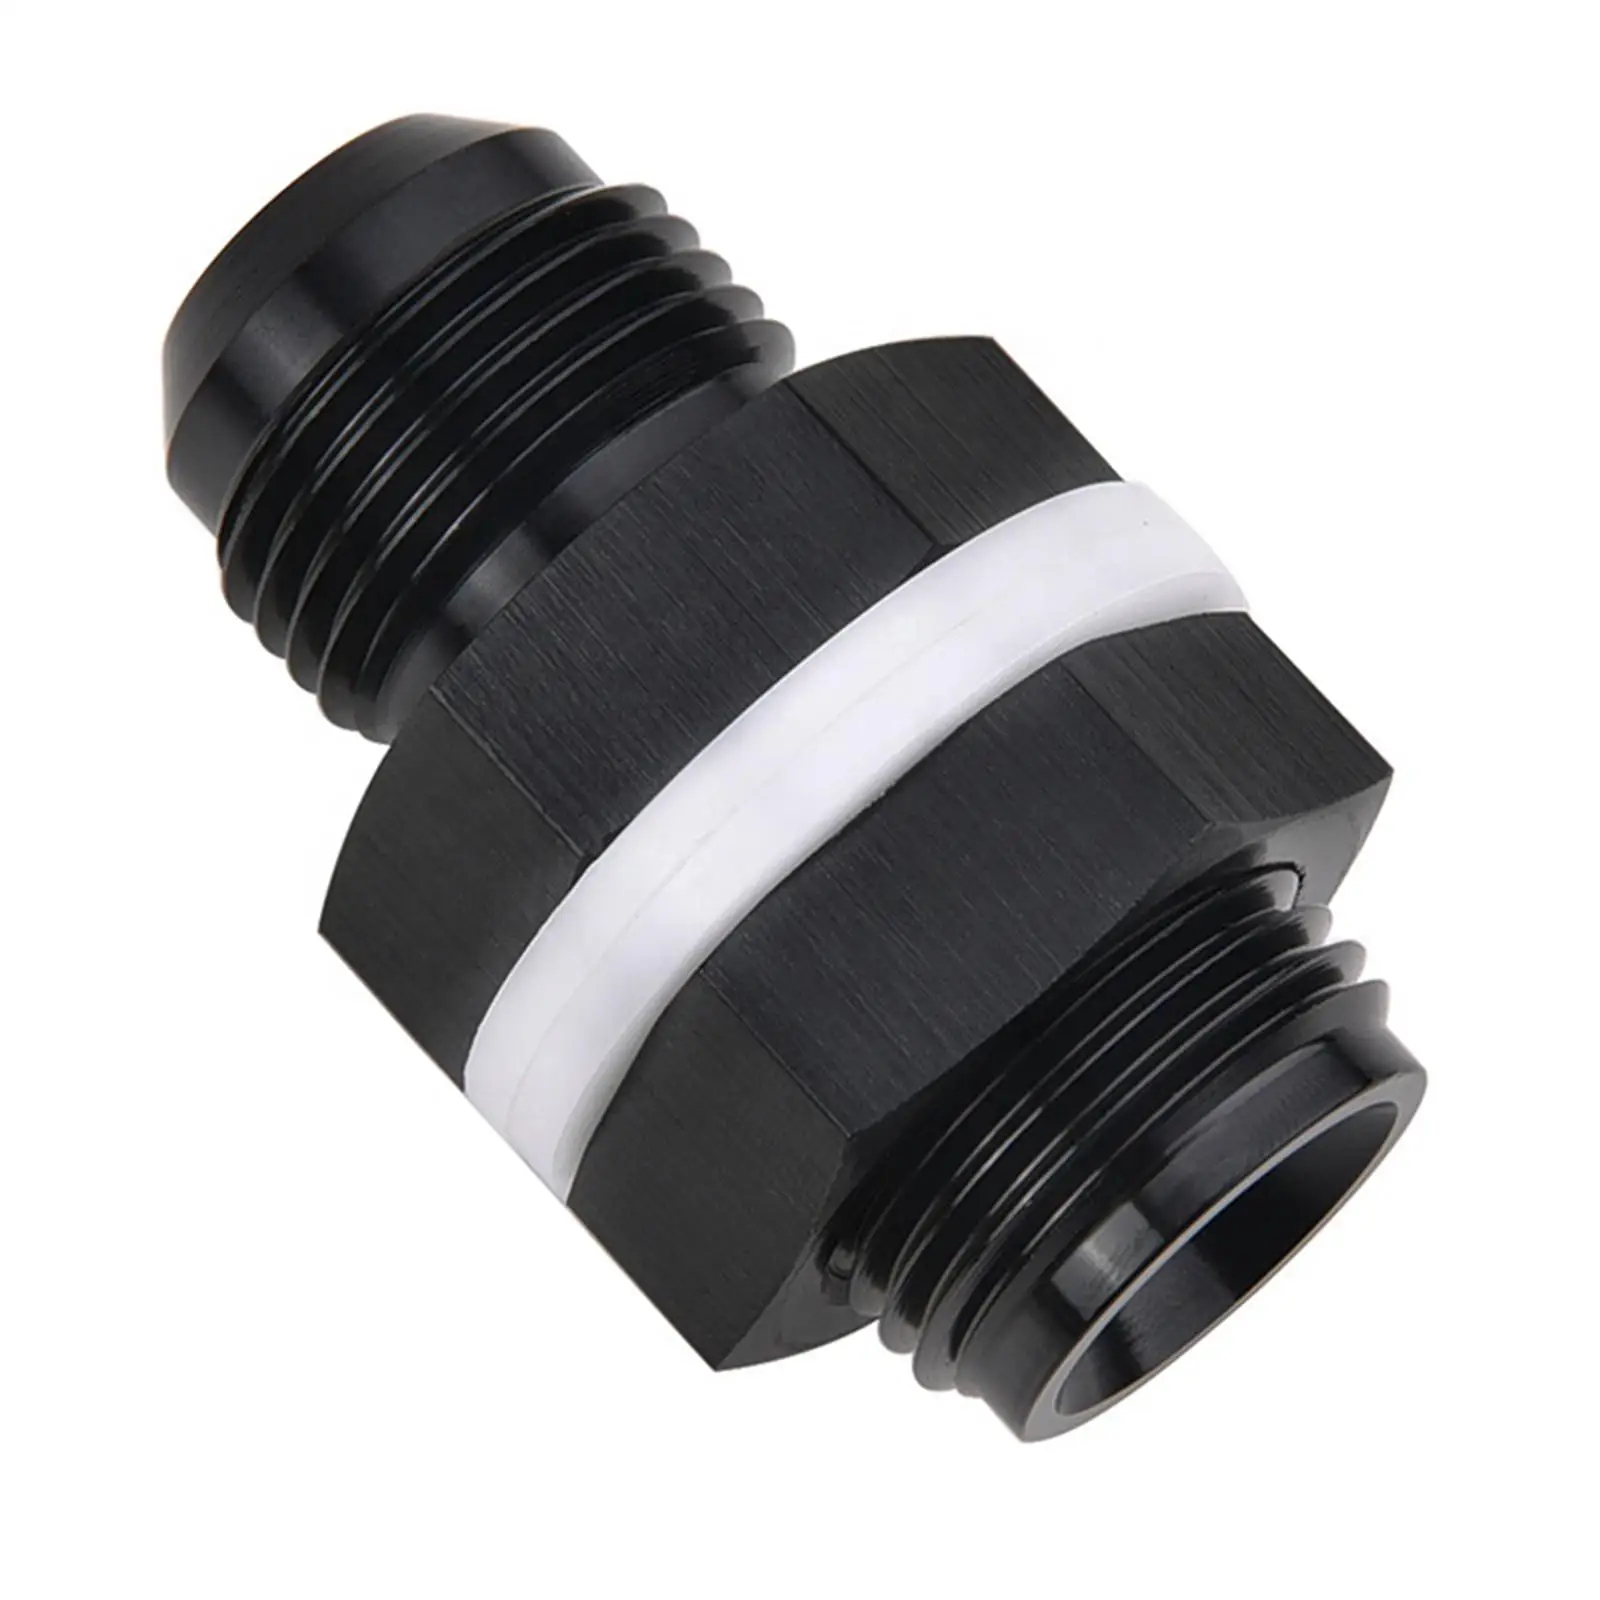 Fuel Cell Bulkhead Fitting Adapter Swivel Adapter Fitting Durable Replace